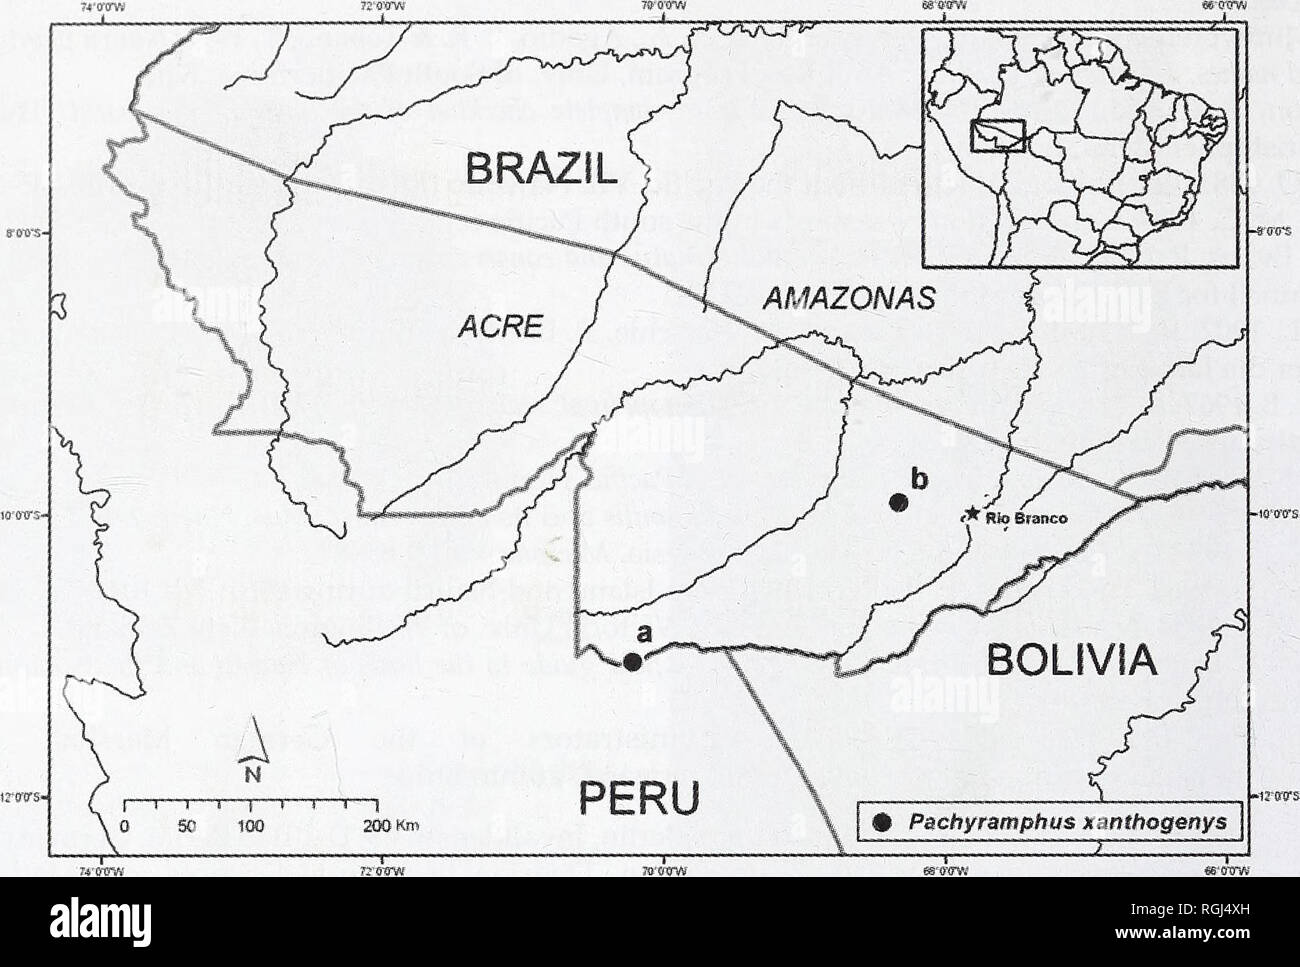 . Bulletin of the British Ornithologists' Club. Alexandre Aleixo et al. 264 Bull. B.O.C. 2008 128(4). Figure 1. Locations where Yellow-cheeked Becard Pachyramphus xanthogenys has been recorded and collected to date in the Brazilian state of Acre: (a) Esta^ao Ecologica do Rio Acre (11°00'S, 70°13'W), and (b) Transacreana' road (09°55'S, 68°20'W). Brazil [MPEG 58925]), on hilly and broken terrain covered by Guadua bamboo with scat- tered emergent trees along the 'igarape do Tombo' creek (elevation c.250 m), at Estagao Ecologica do Rio Acre, a 77,500-ha conservation unit on the Brazilian / Peruvi Stock Photo